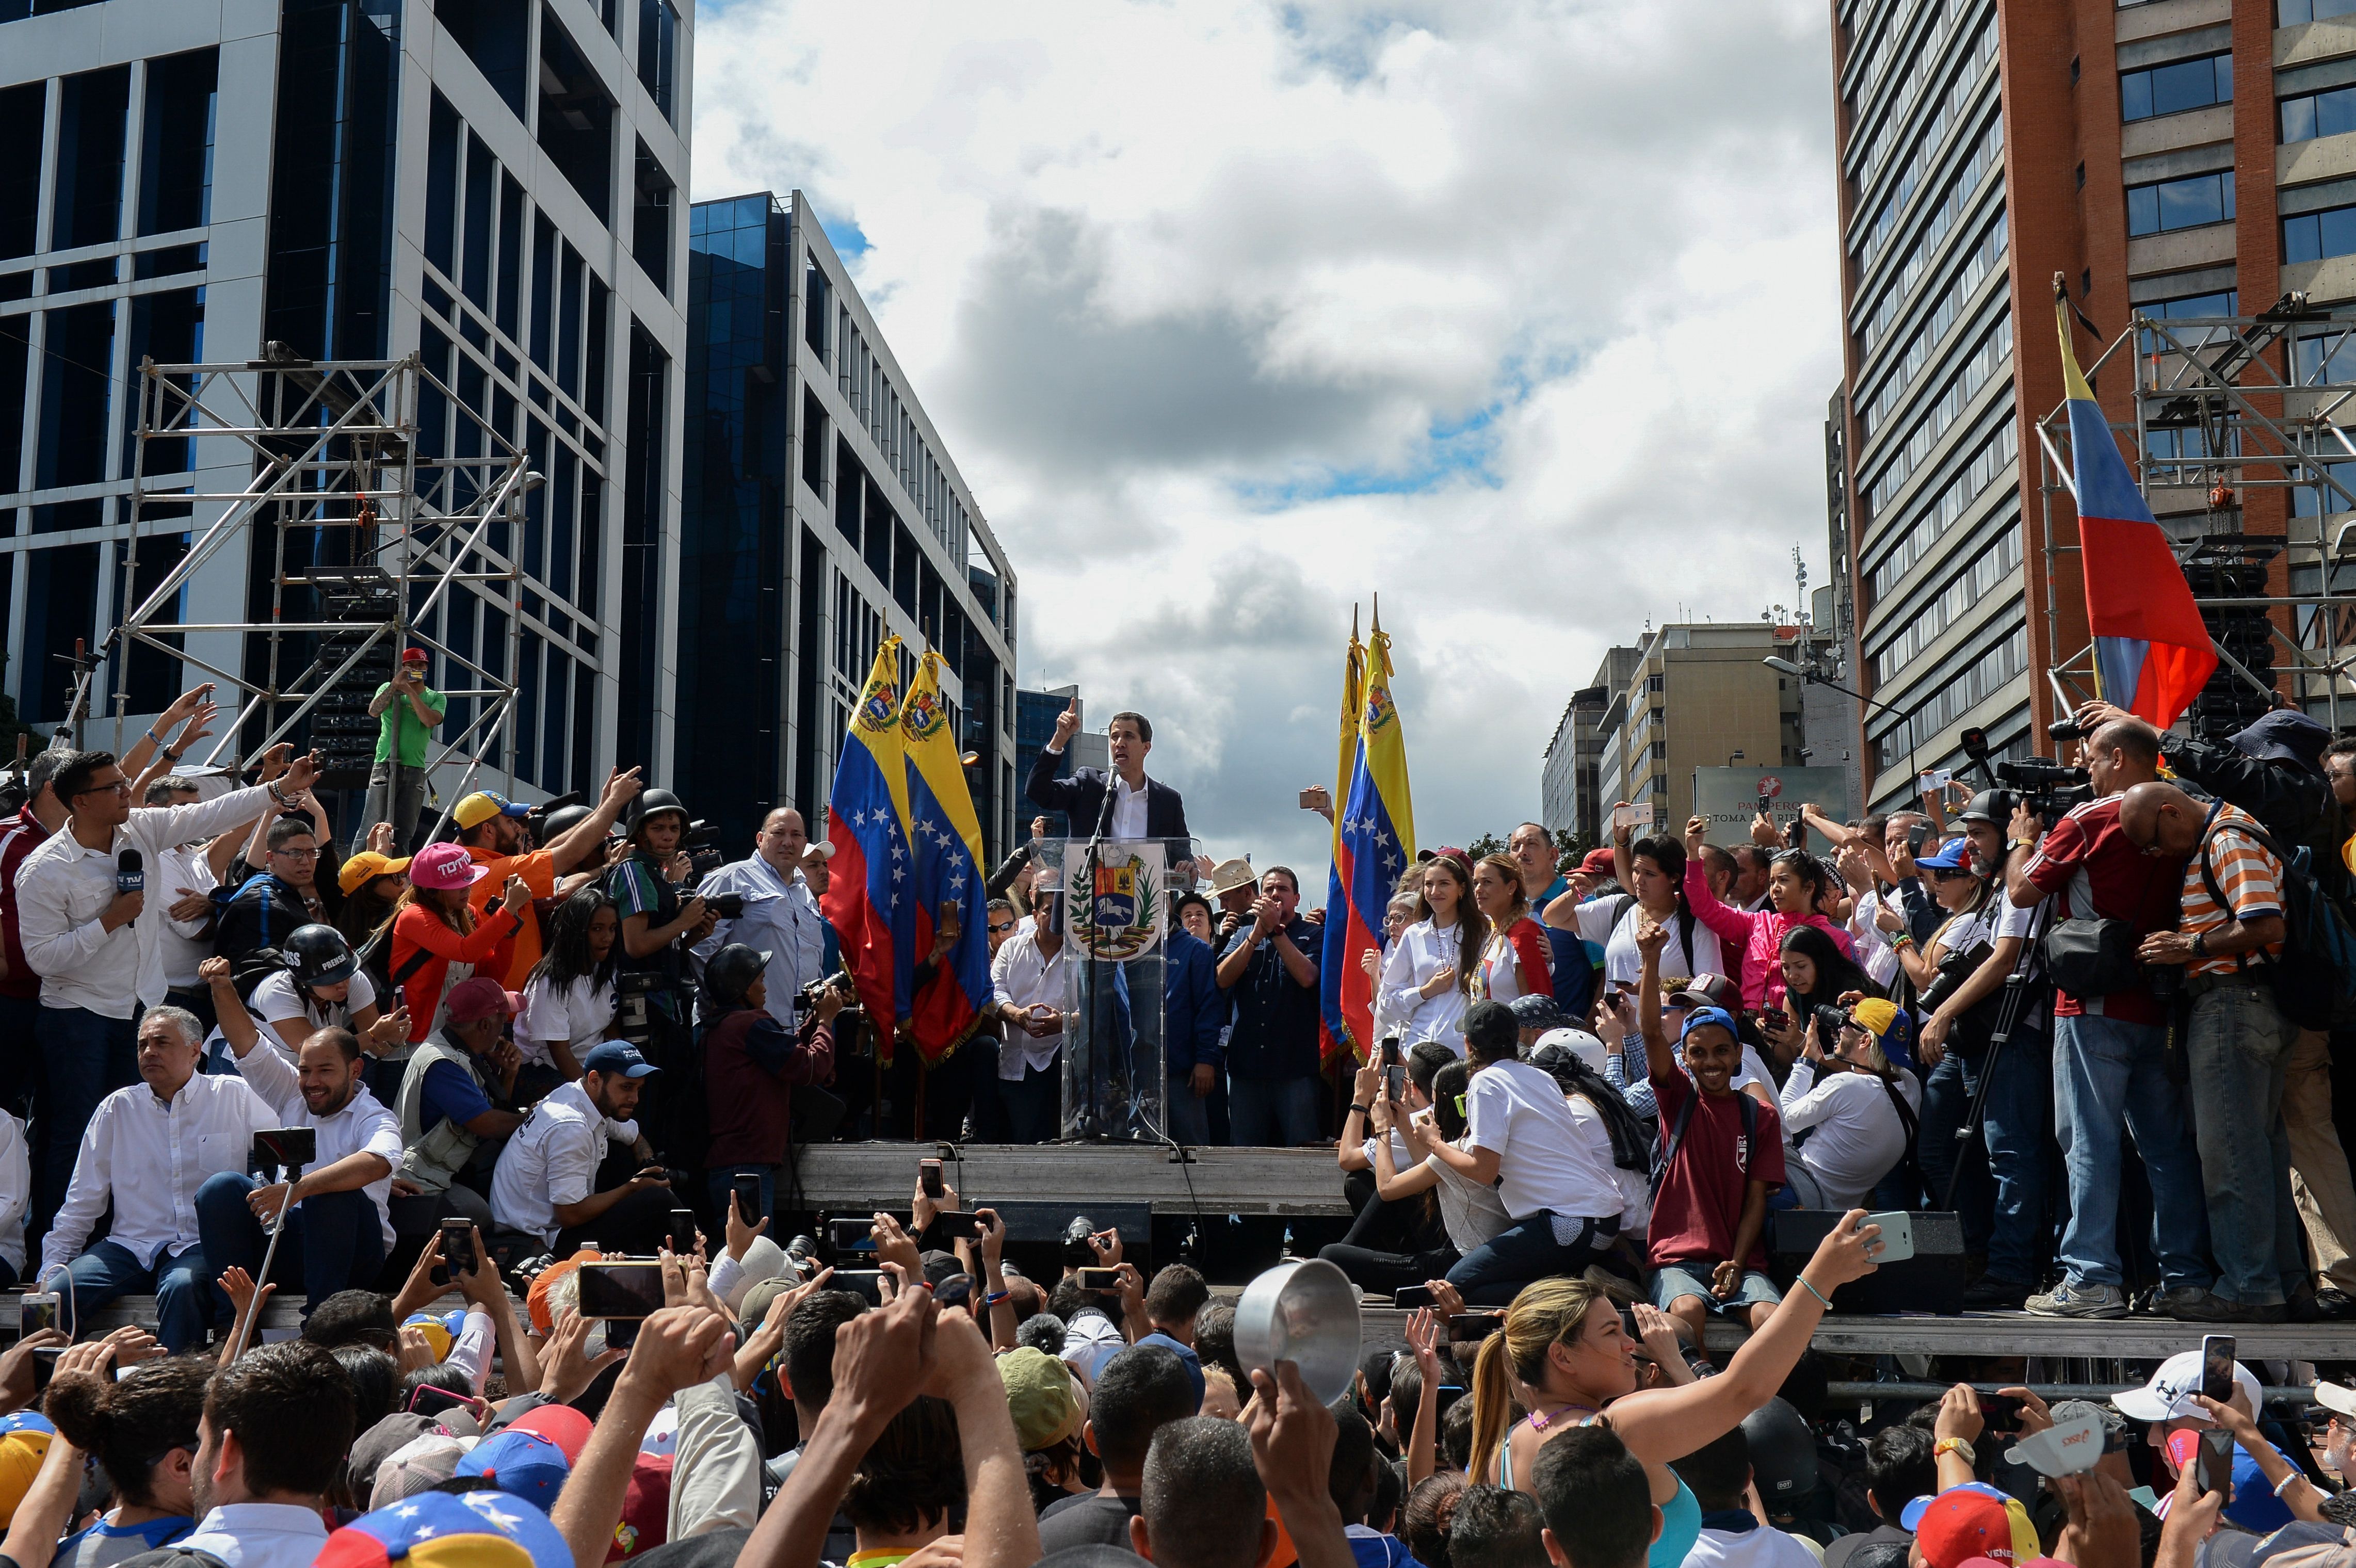 Juan Guaido surrounded by supporters.